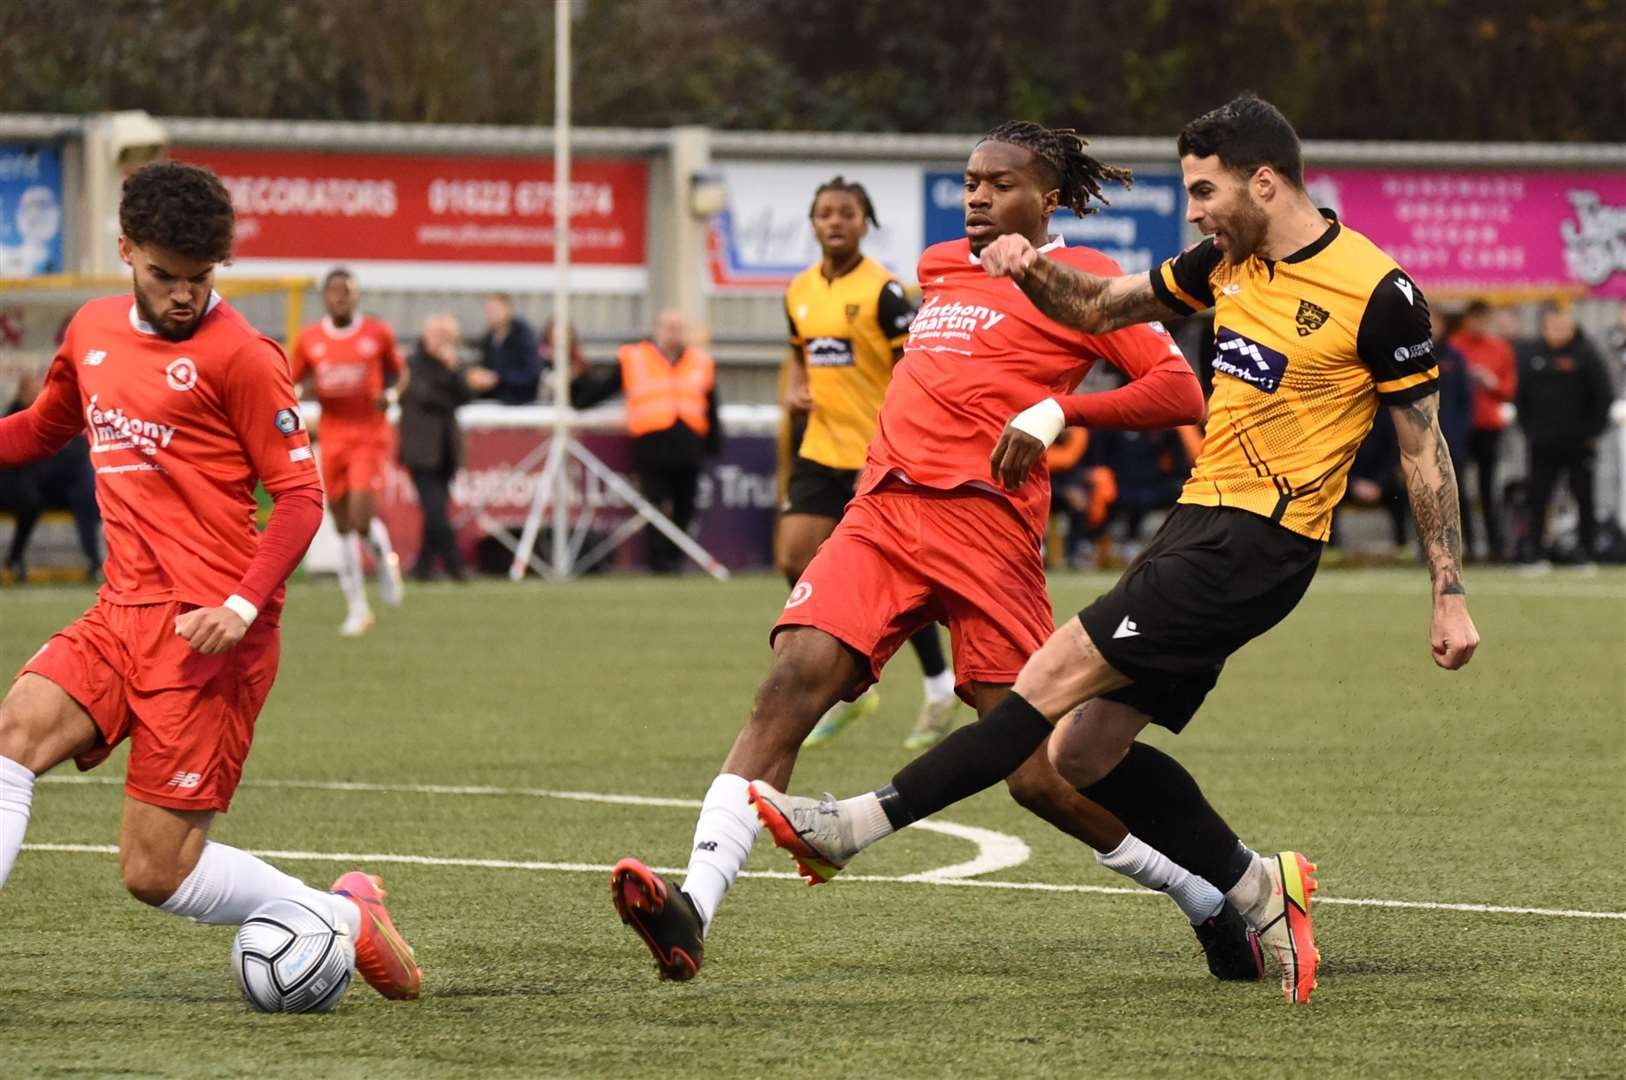 Maidstone beat Welling 4-1 at the Gallagher Stadium on Tuesday Picture: Steve Terrell